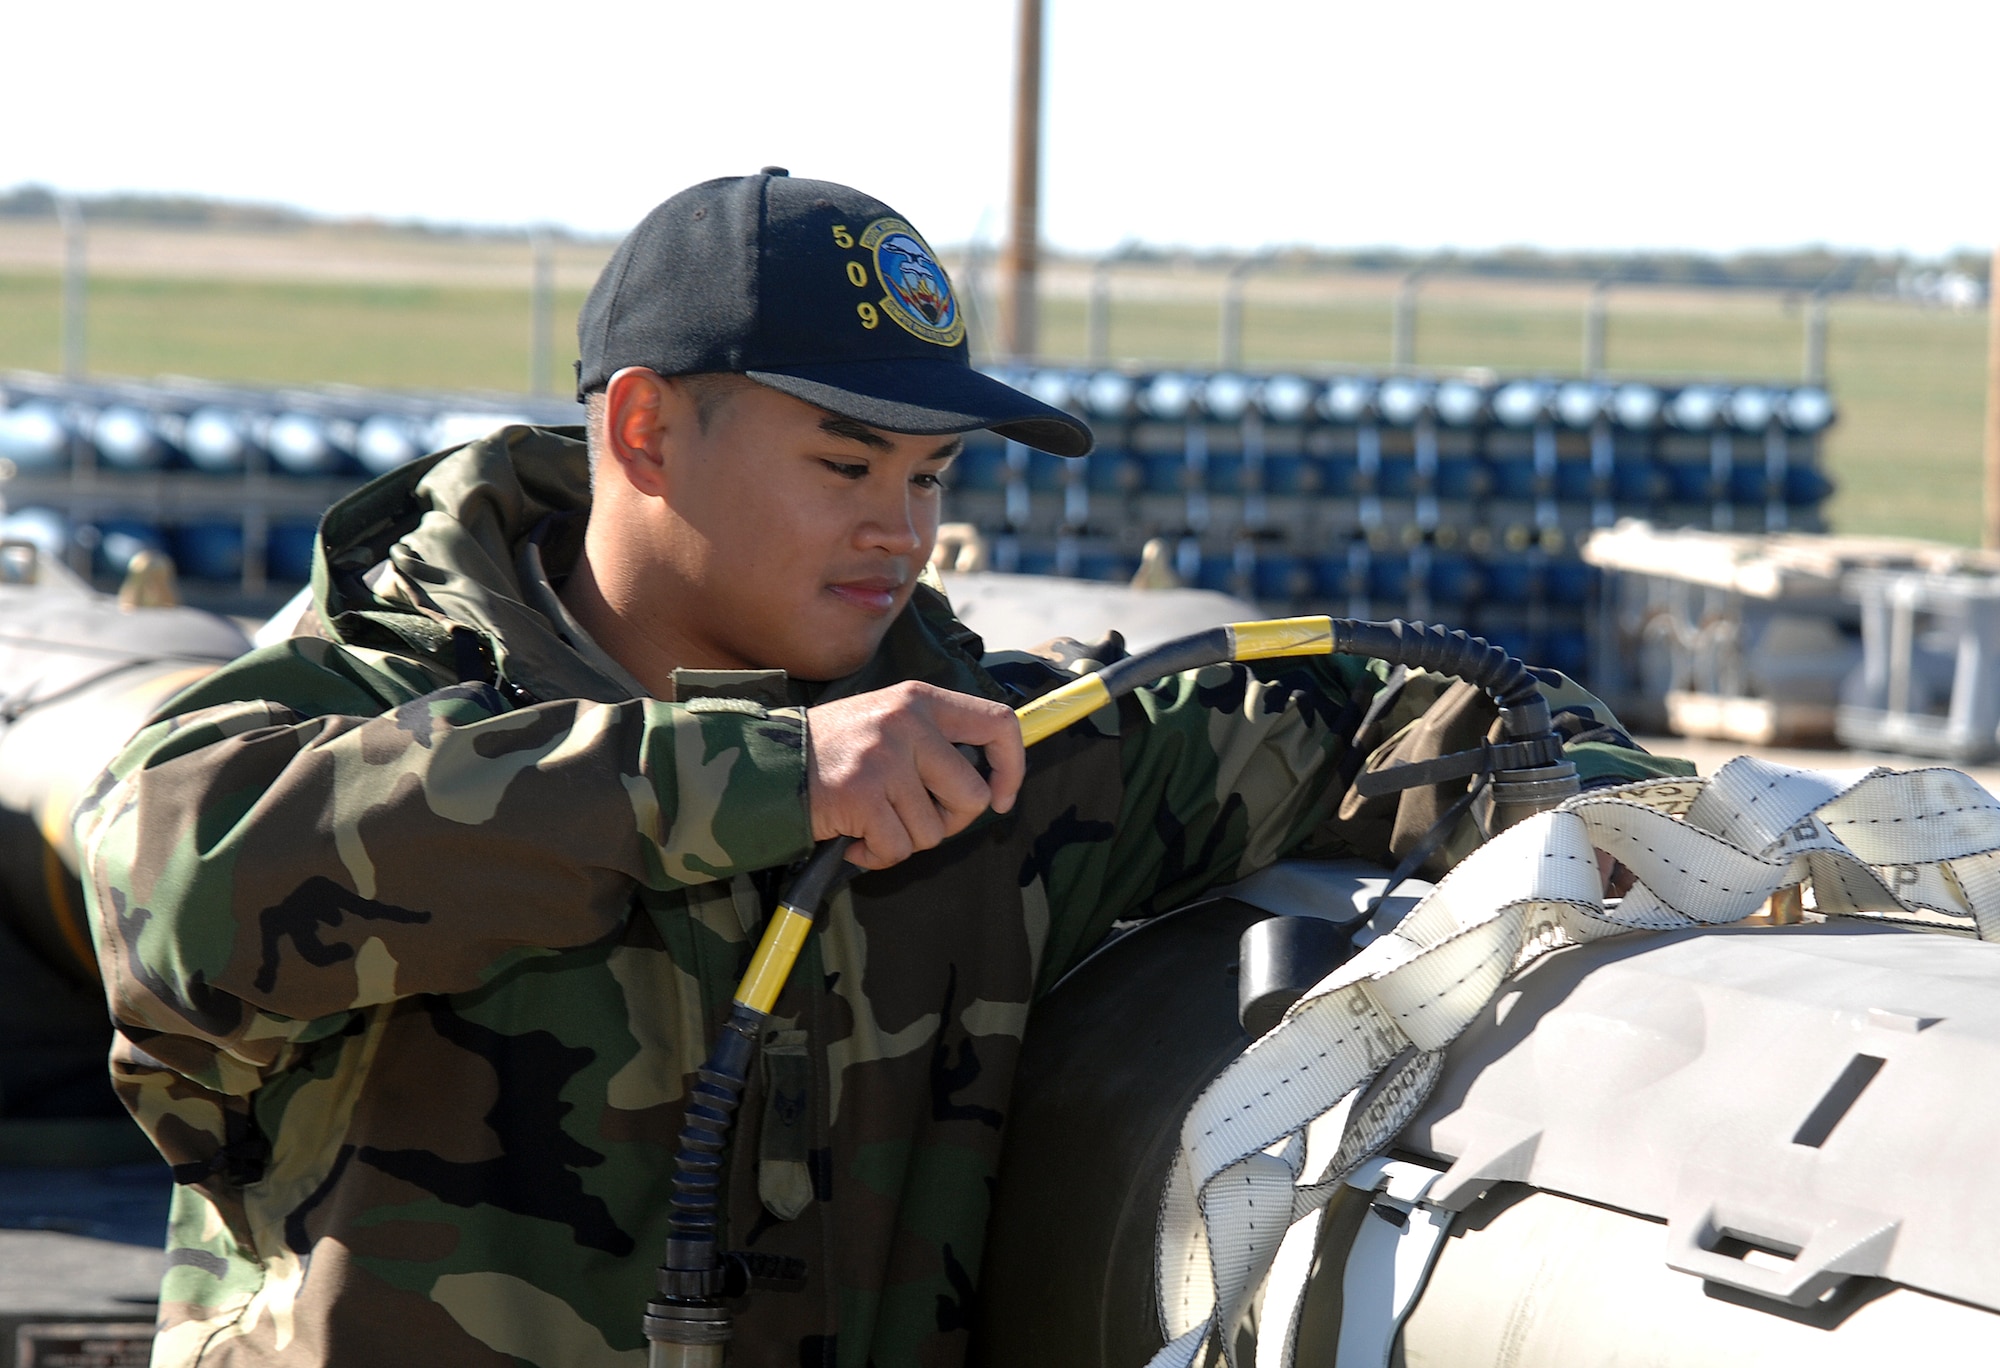 WHITEMAN AIR FORCE BASE, Mo. -- Airman 1st Class Mark Cruz, 509th Munitions Squadron, attaches a test set cable to the umbilical connection on the Joint Direct Attack Munitions to allow for a software upgrade Oct. 24. (U.S. Air Force photo/Tech. Sgt. Samuel A. Park)